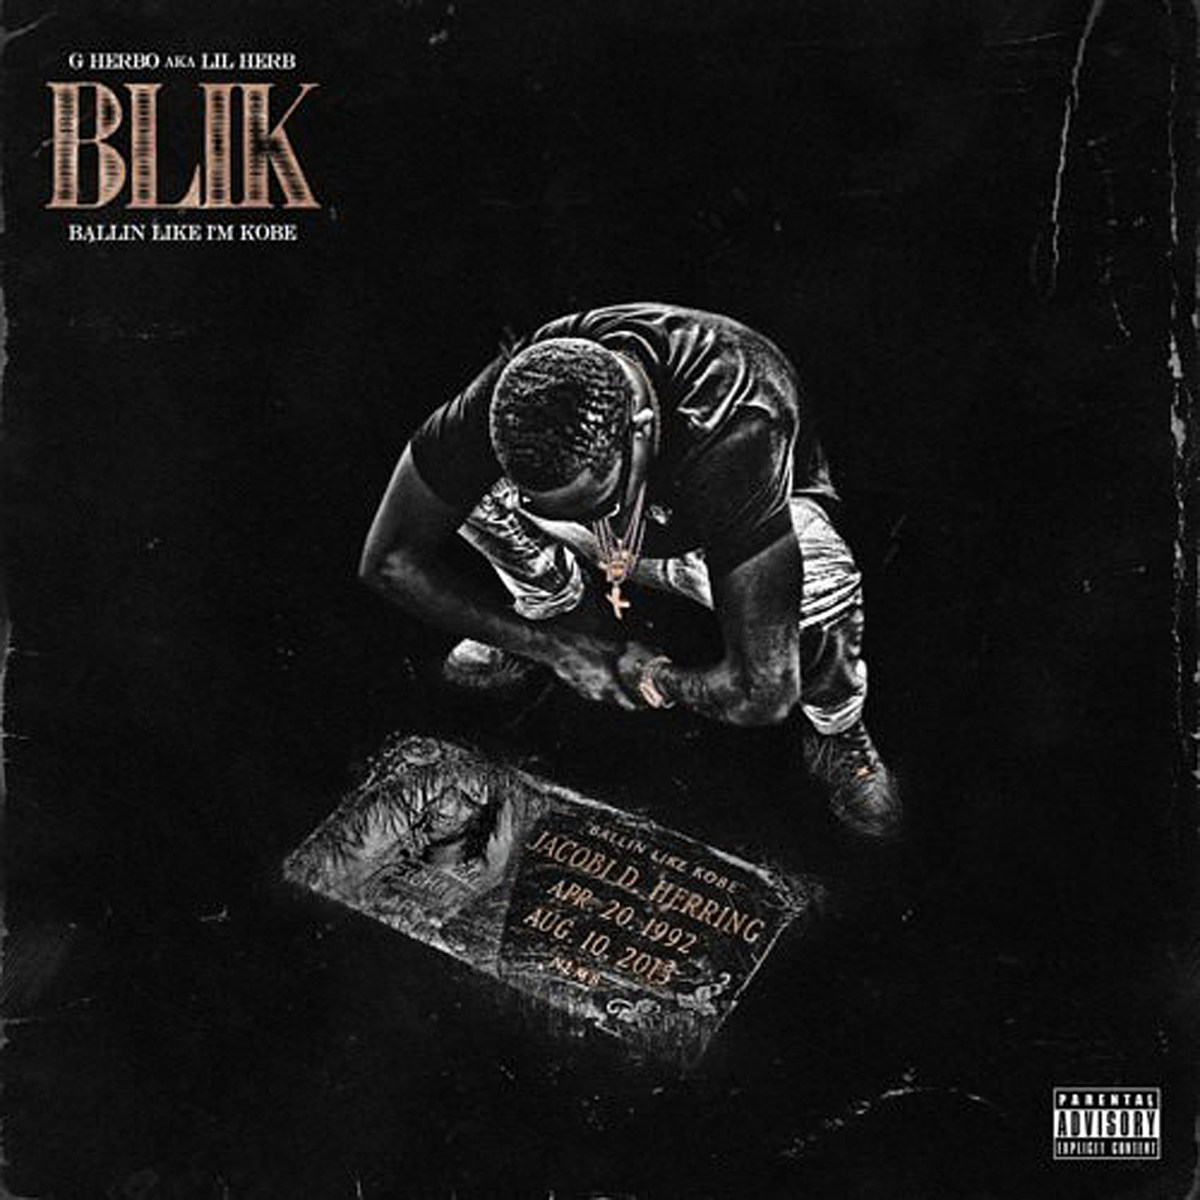 Listen to G Herbo's "Ain't Right" Featuring Lil Durk  XXL